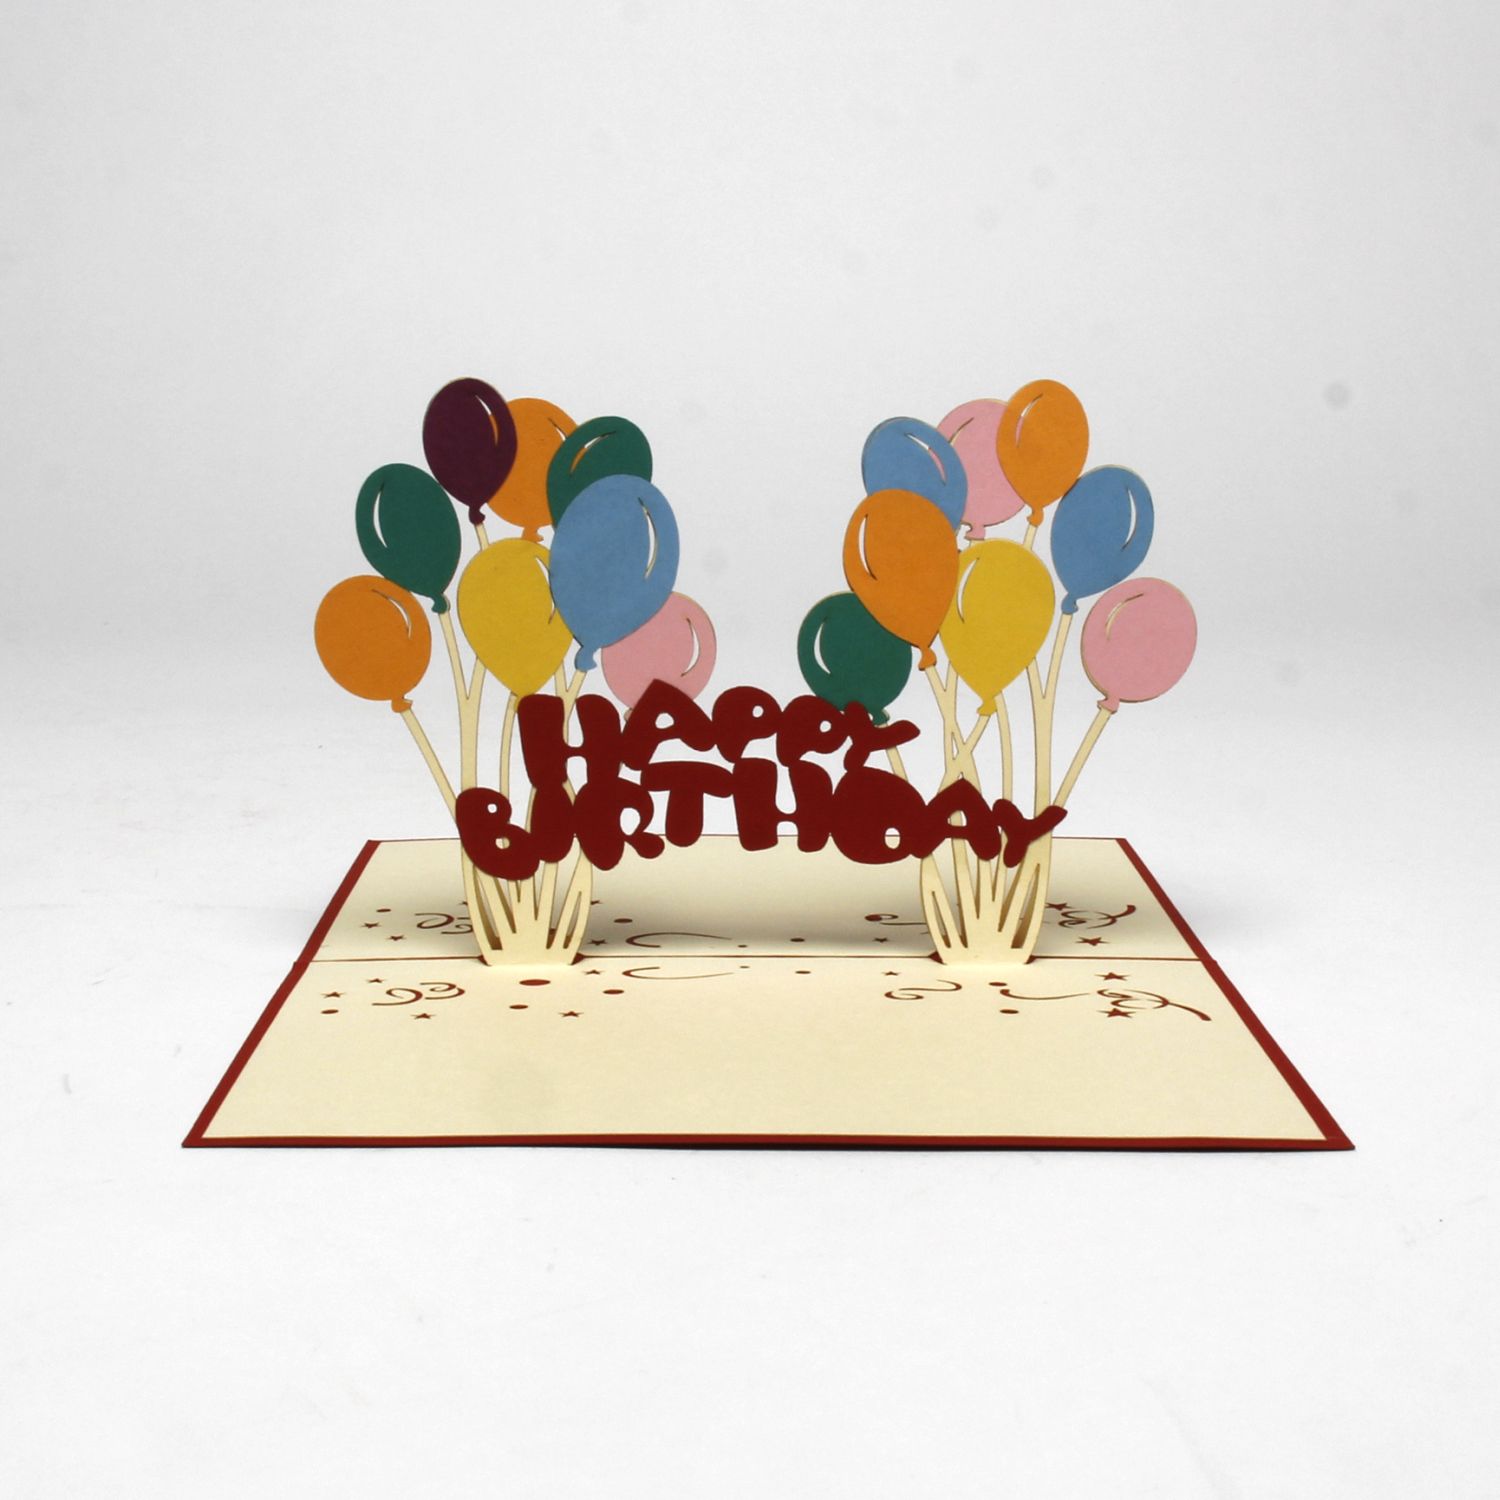 Roses without Thorns: Birthday Balloon Product Image 1 of 2